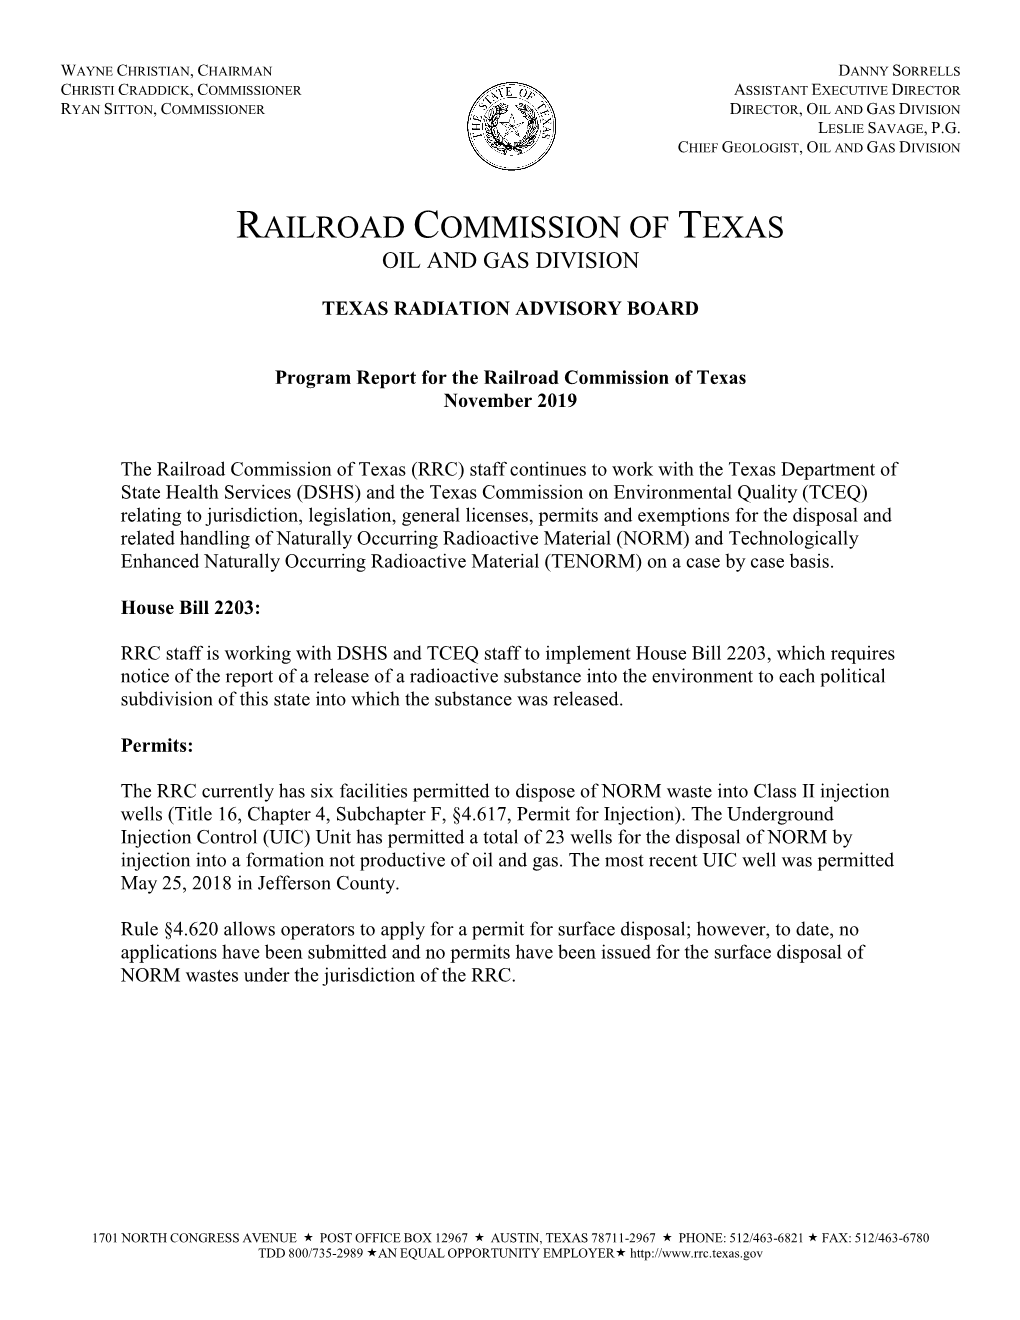 Railroad Commission of Texas Oil and Gas Division